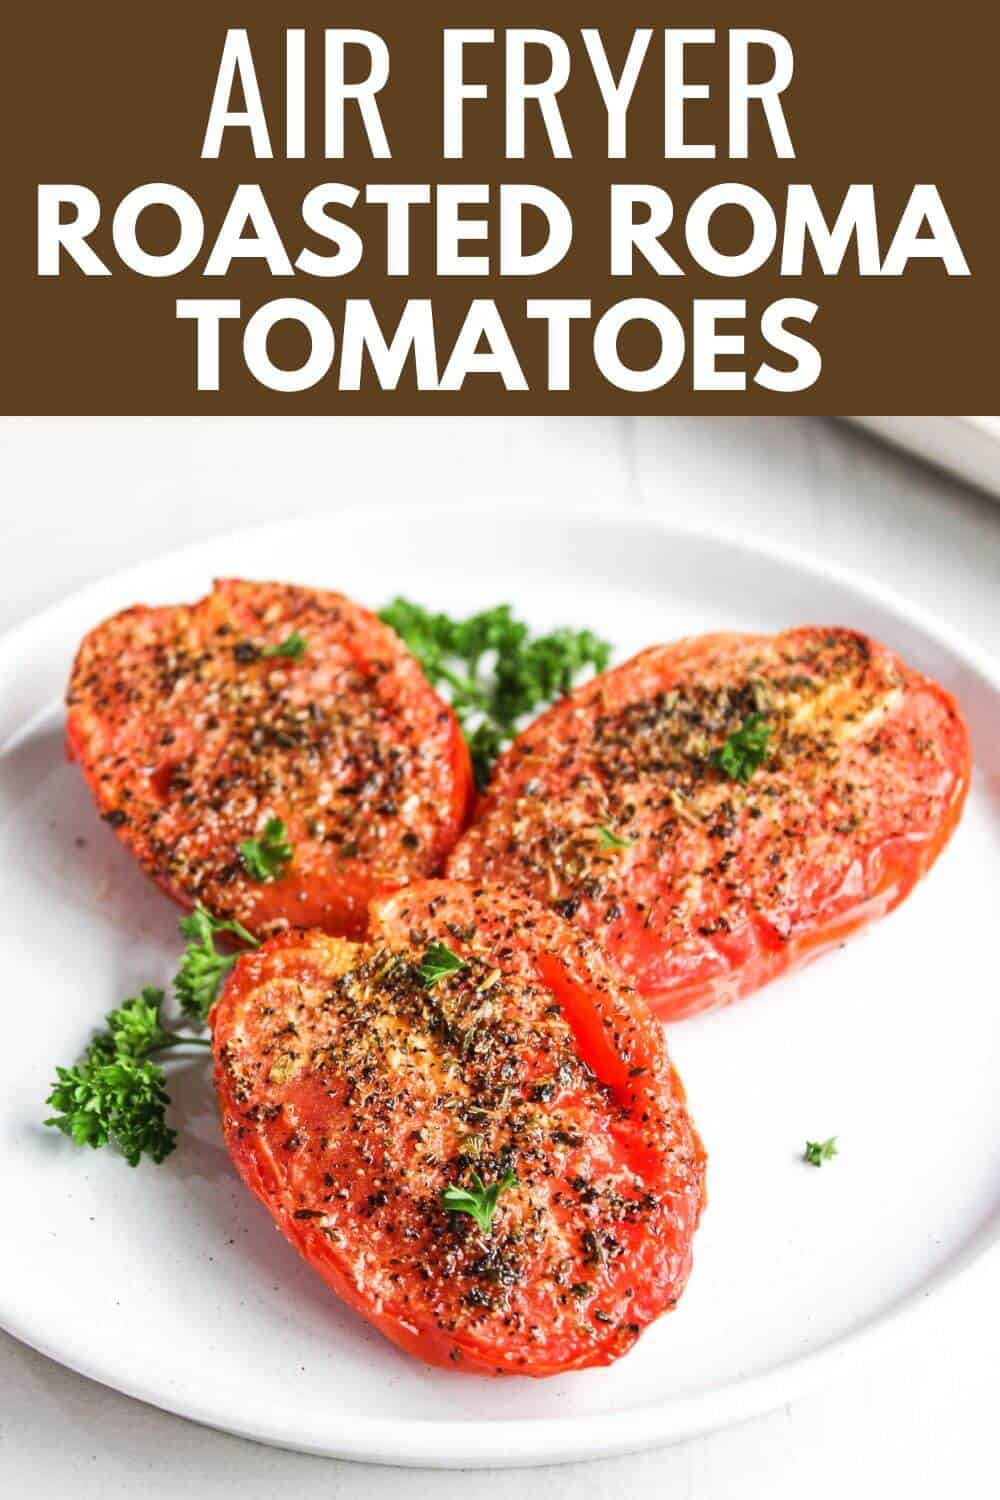 Air fryer roasted roma tomatoes.